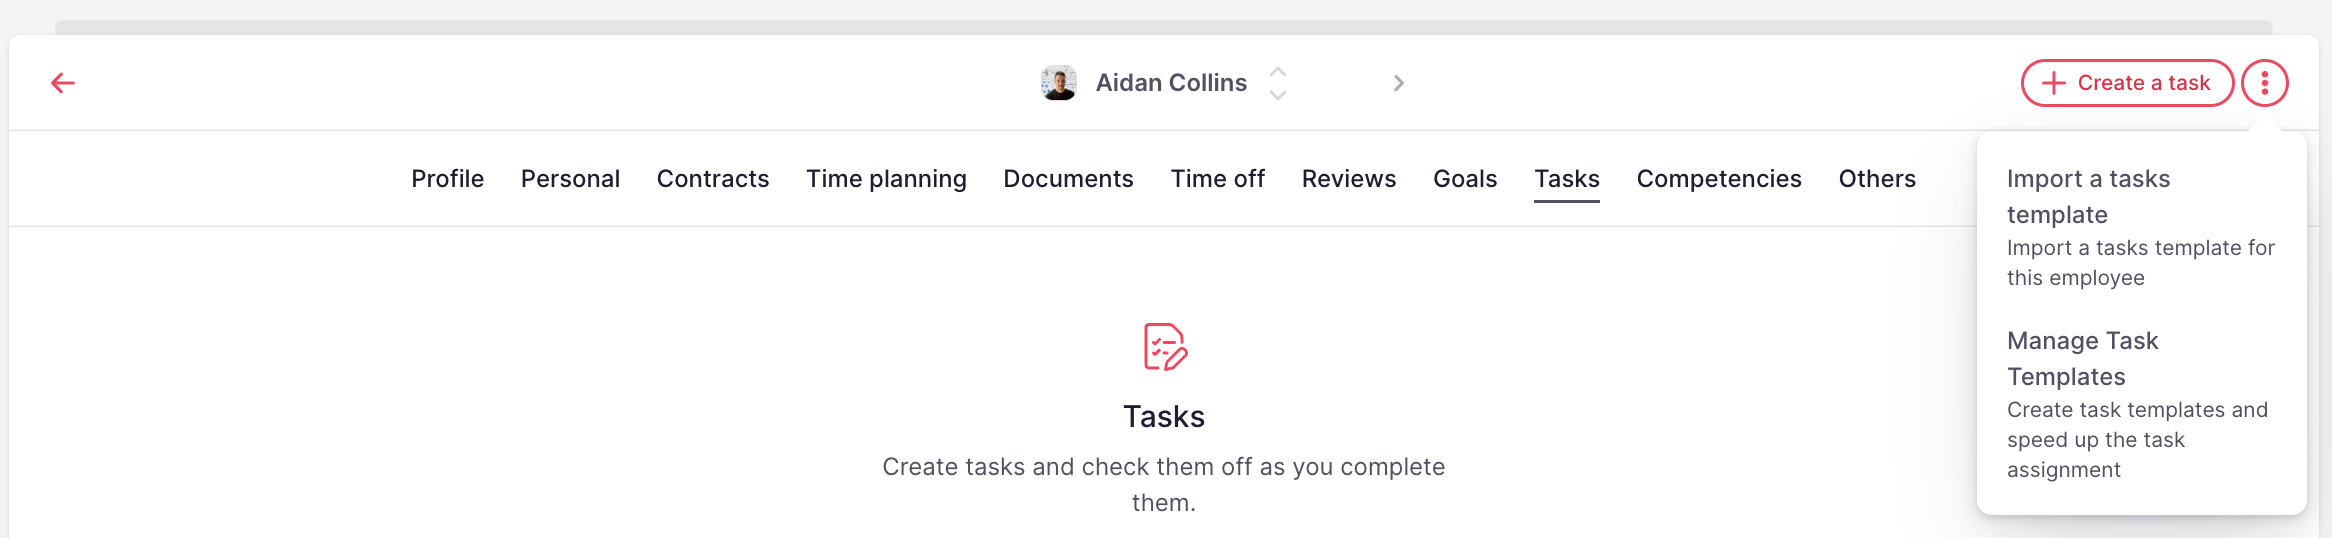 How to create and assign task templates-import-EN